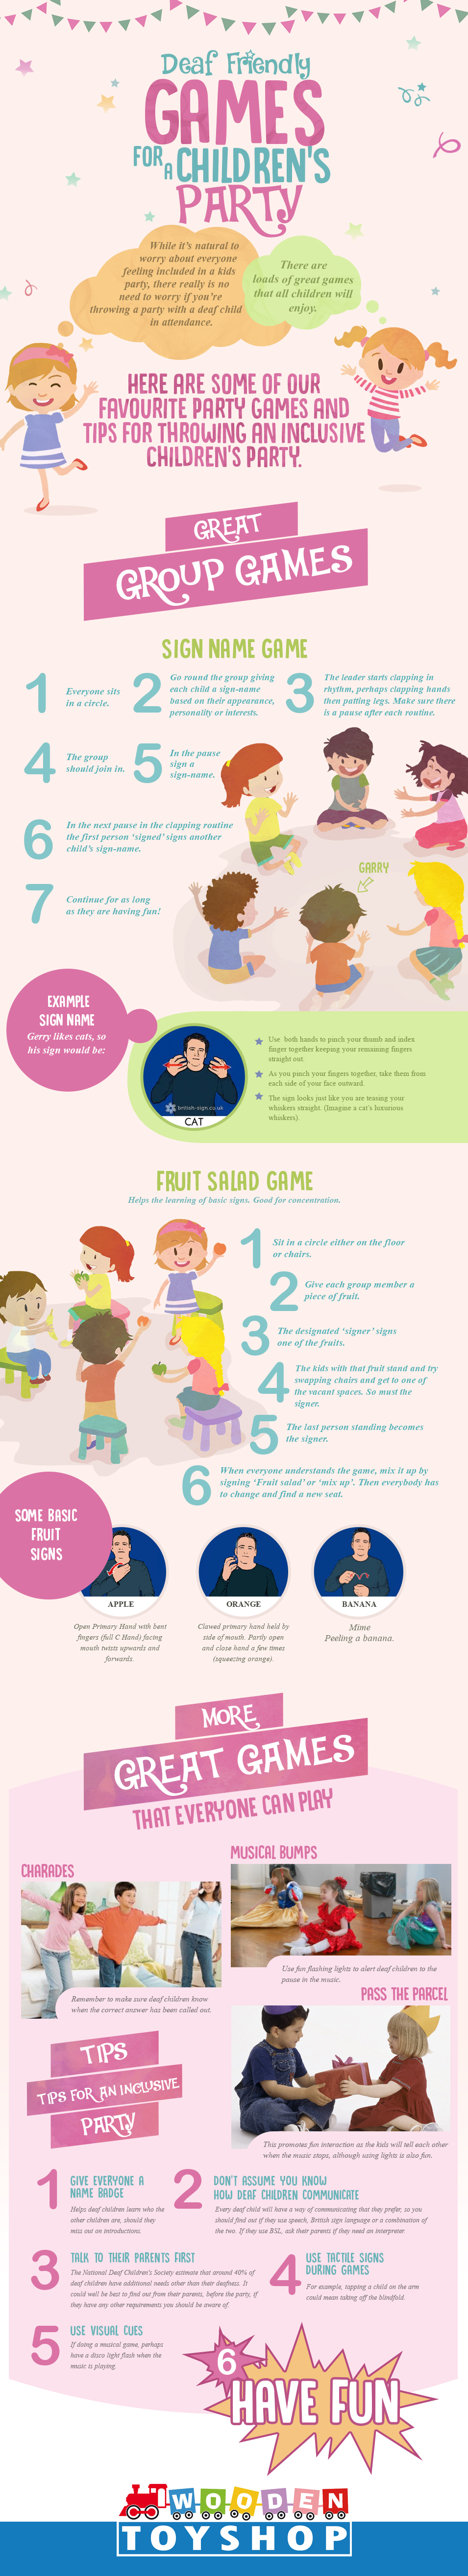 Deaf-Friendly Games for a Children's Party